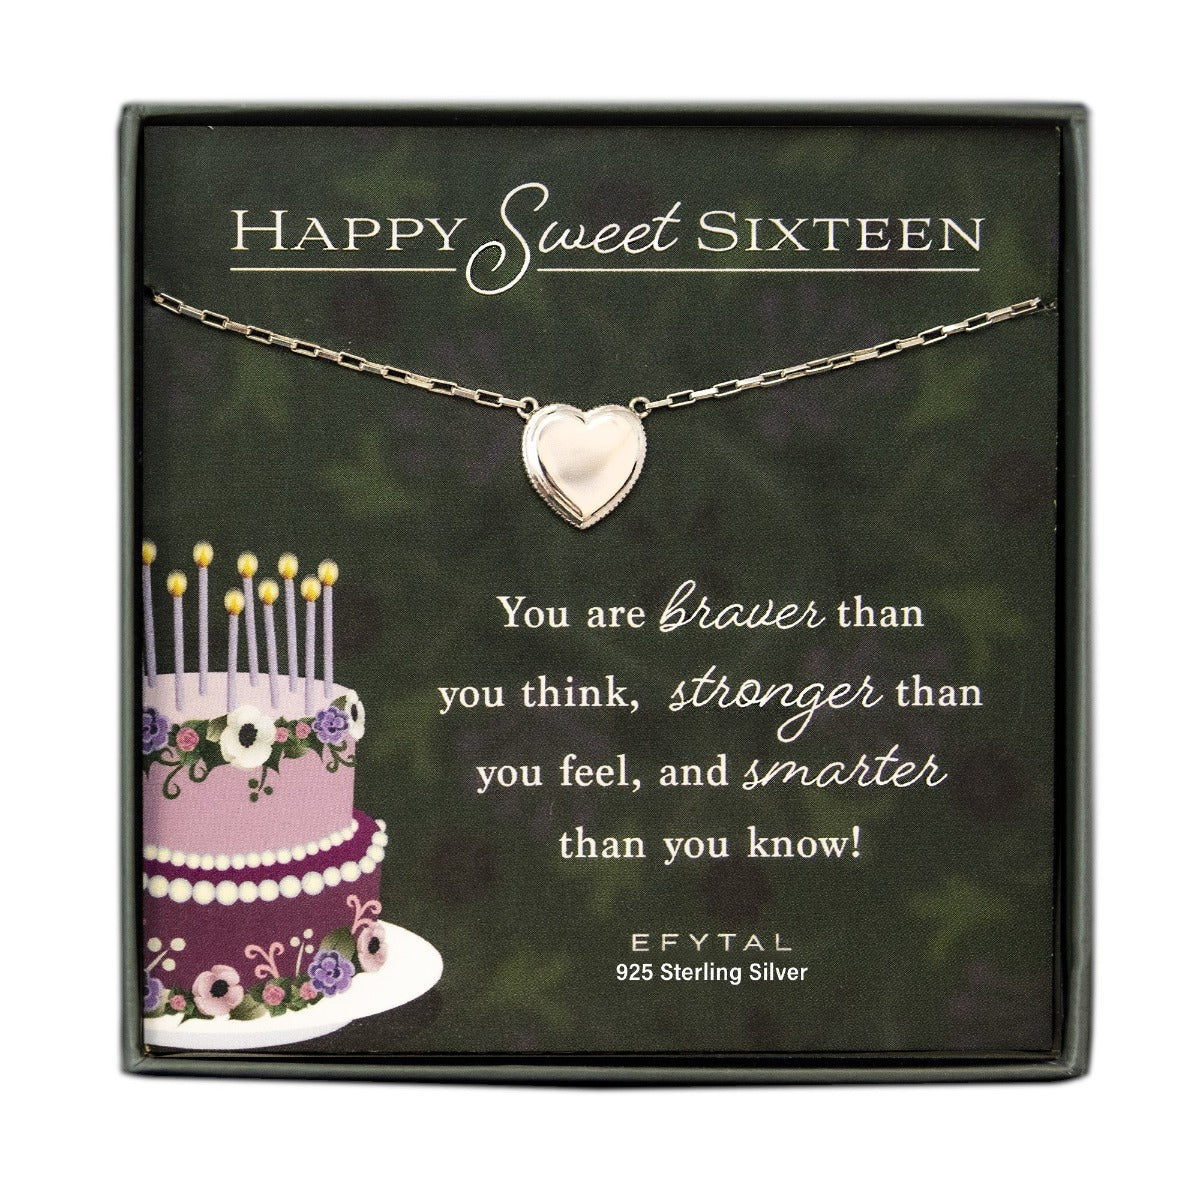 Sweet 16 Necklace Sweet Sixteen Charm Heart Silver Plated 